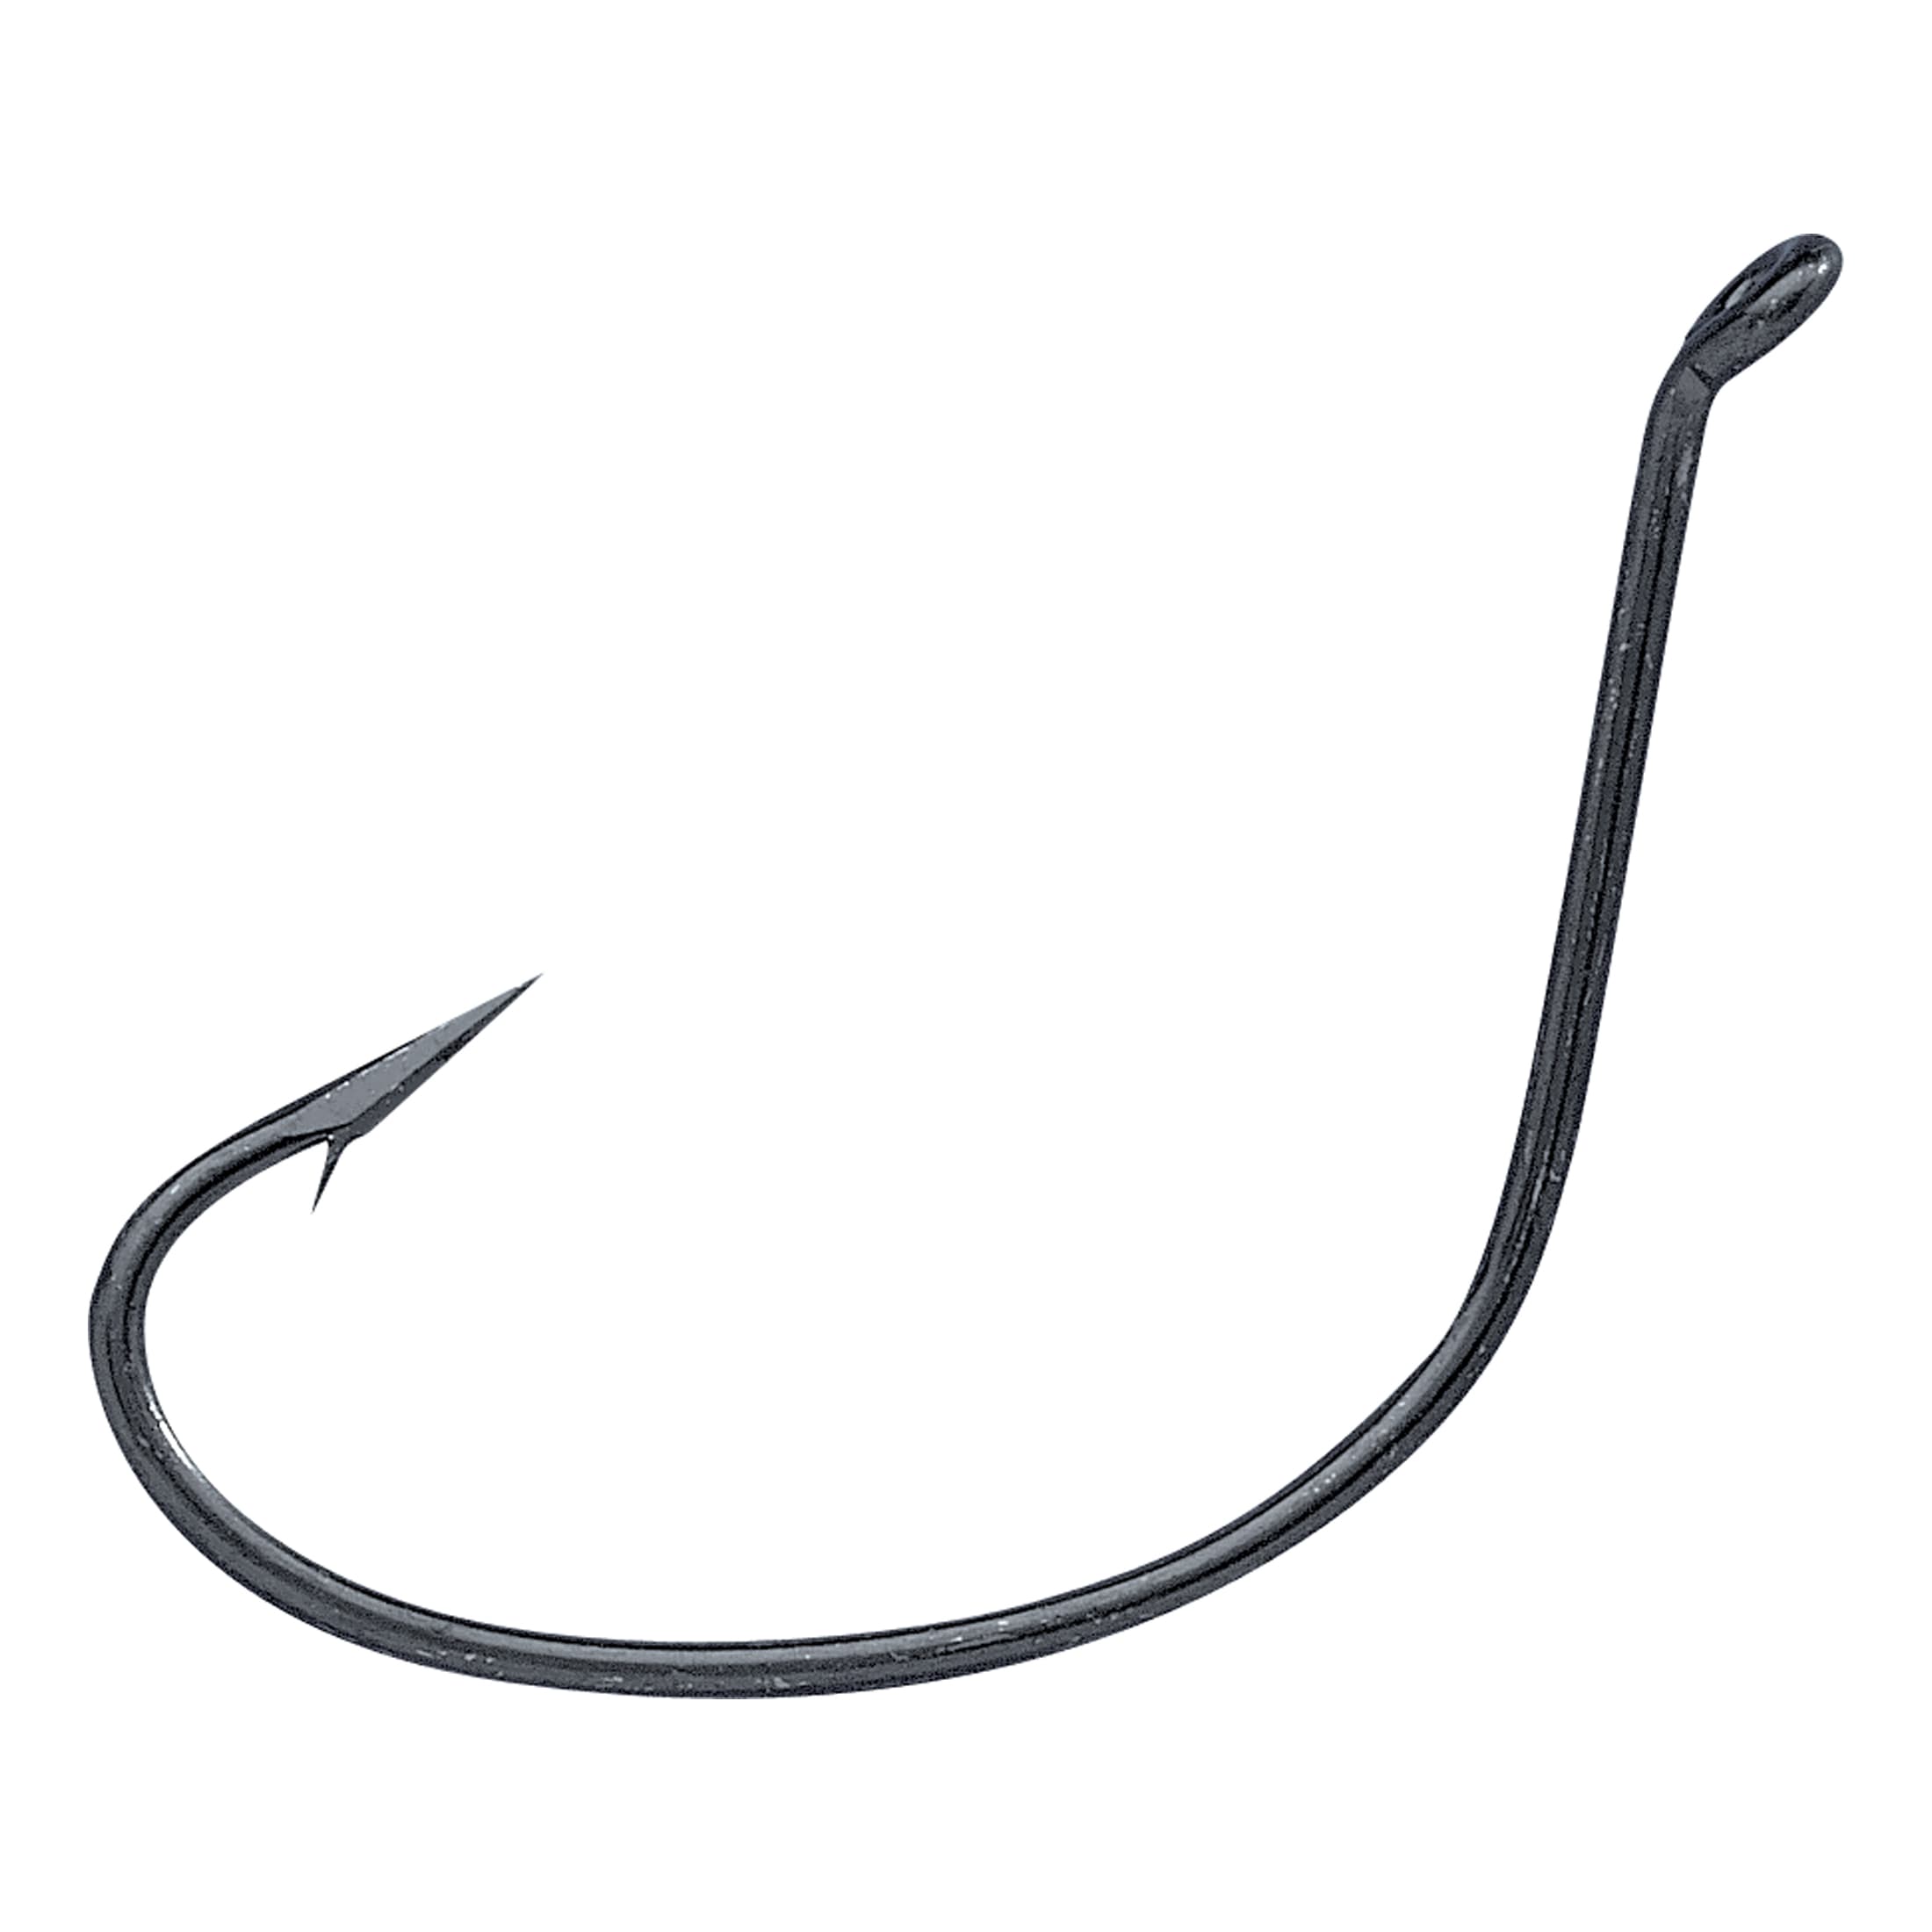 Eagle Claw Kahle Hook - 25 Pack - Cabelas - EAGLE CLAW - Saltwater